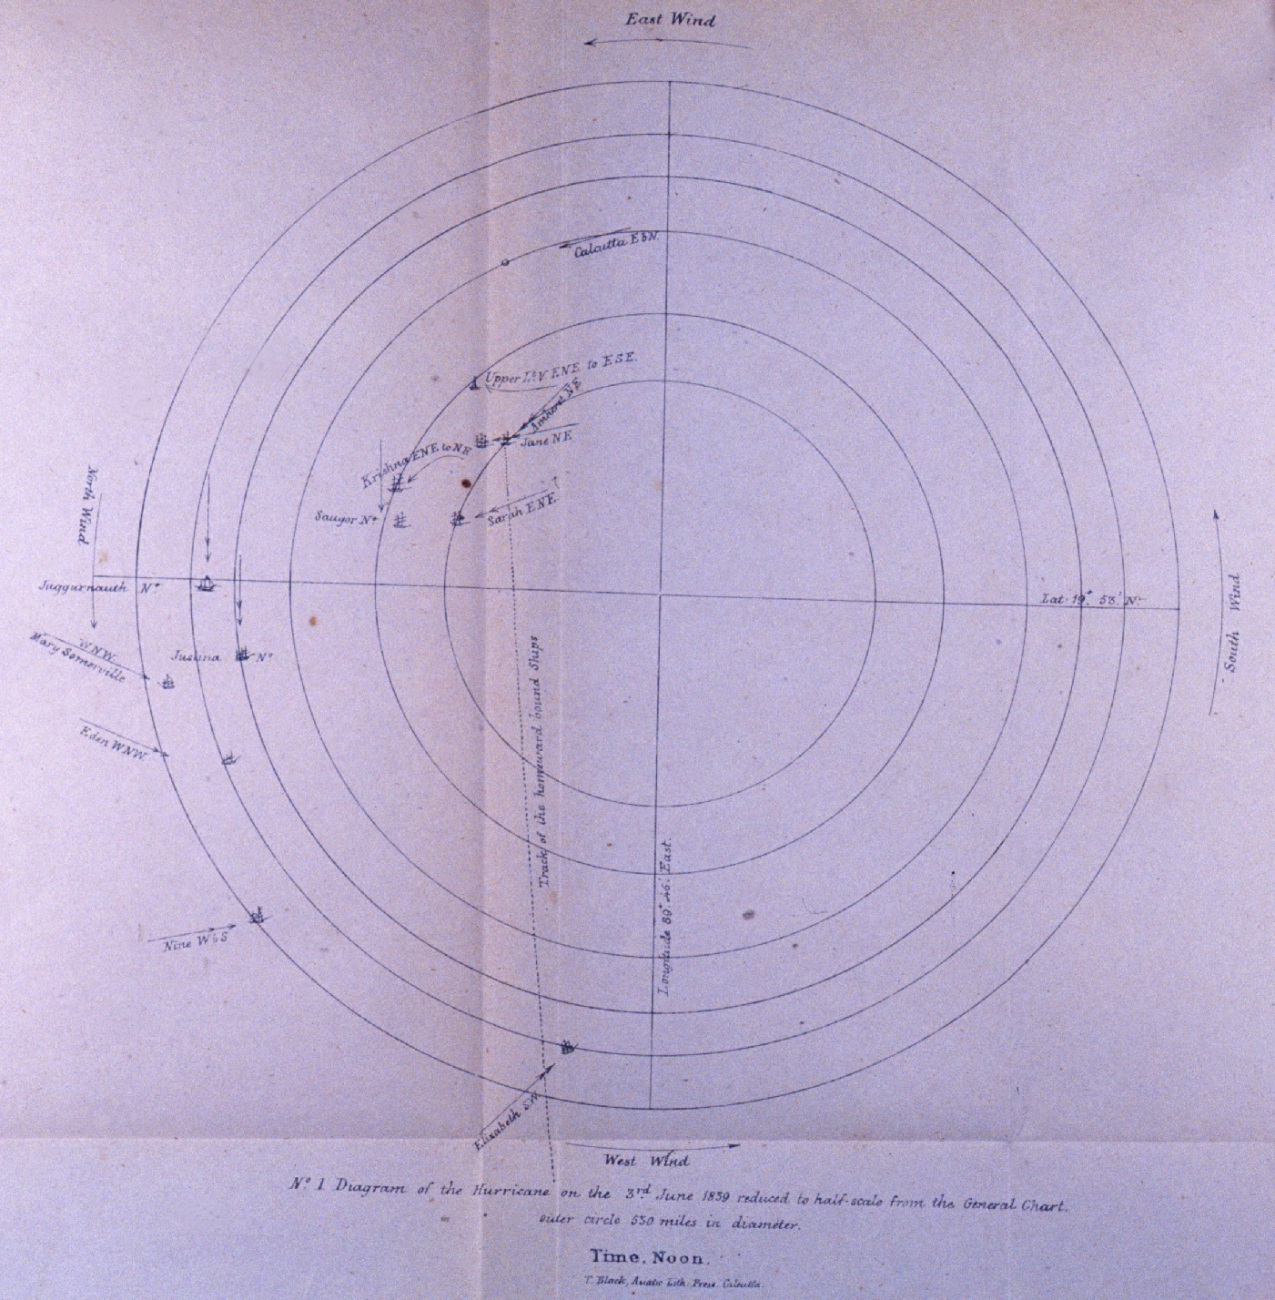 Diagram of the hurricane on the 3rd June 1839 reduced to half-scale from theGeneral Chart, outer circle 530 miles in diameter